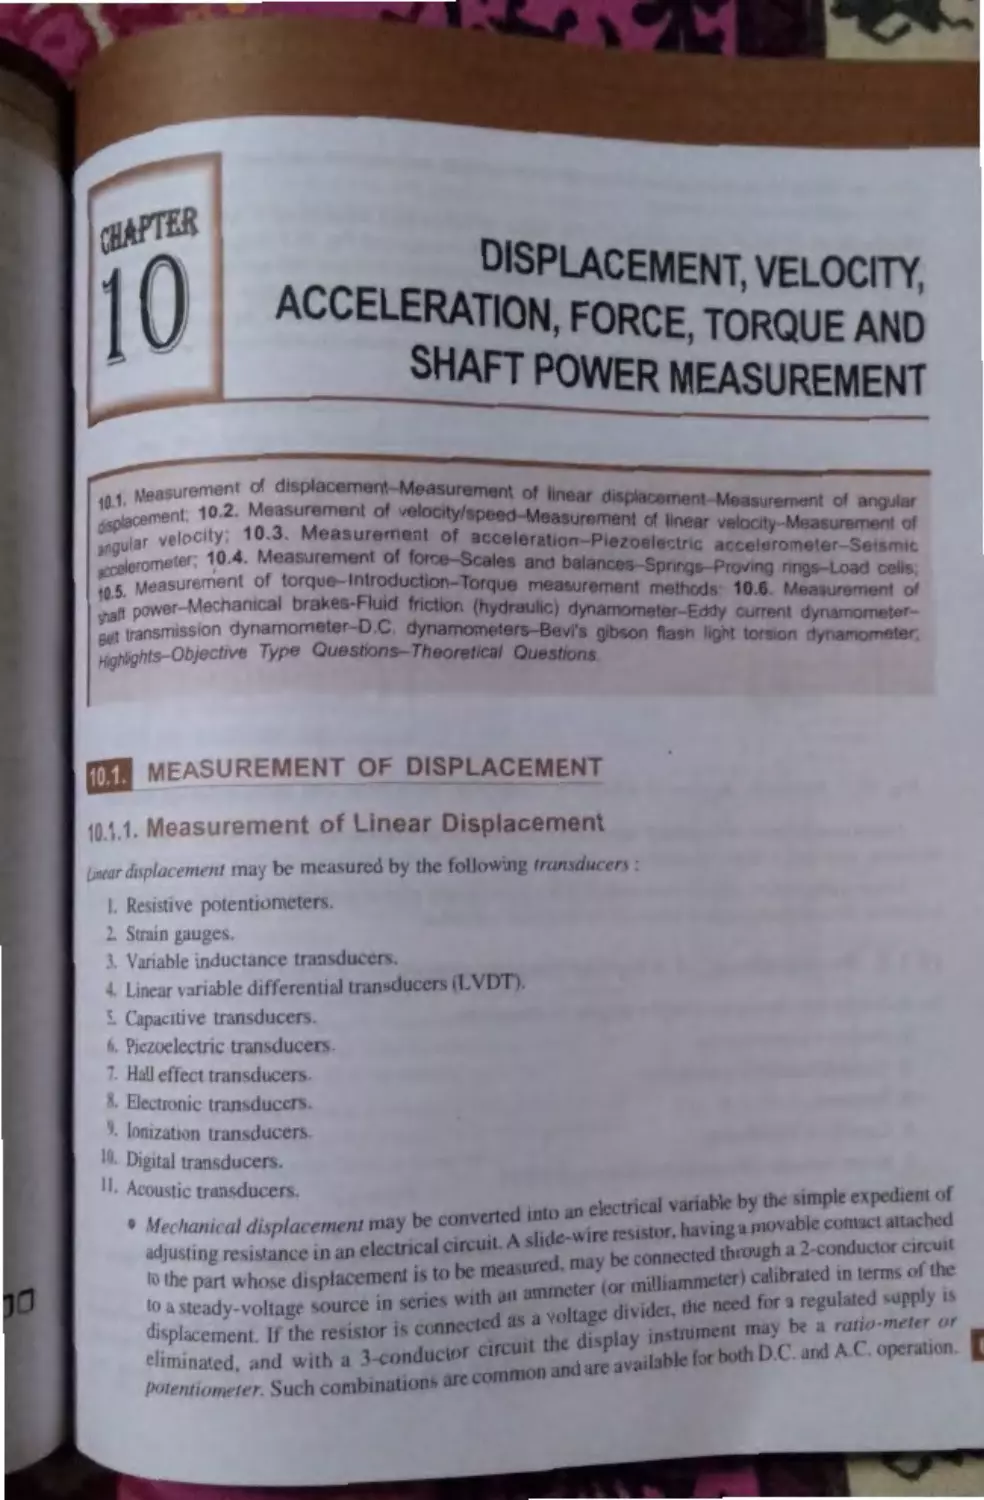 10. Speed, Force, Torque and Shaft Power Measurement